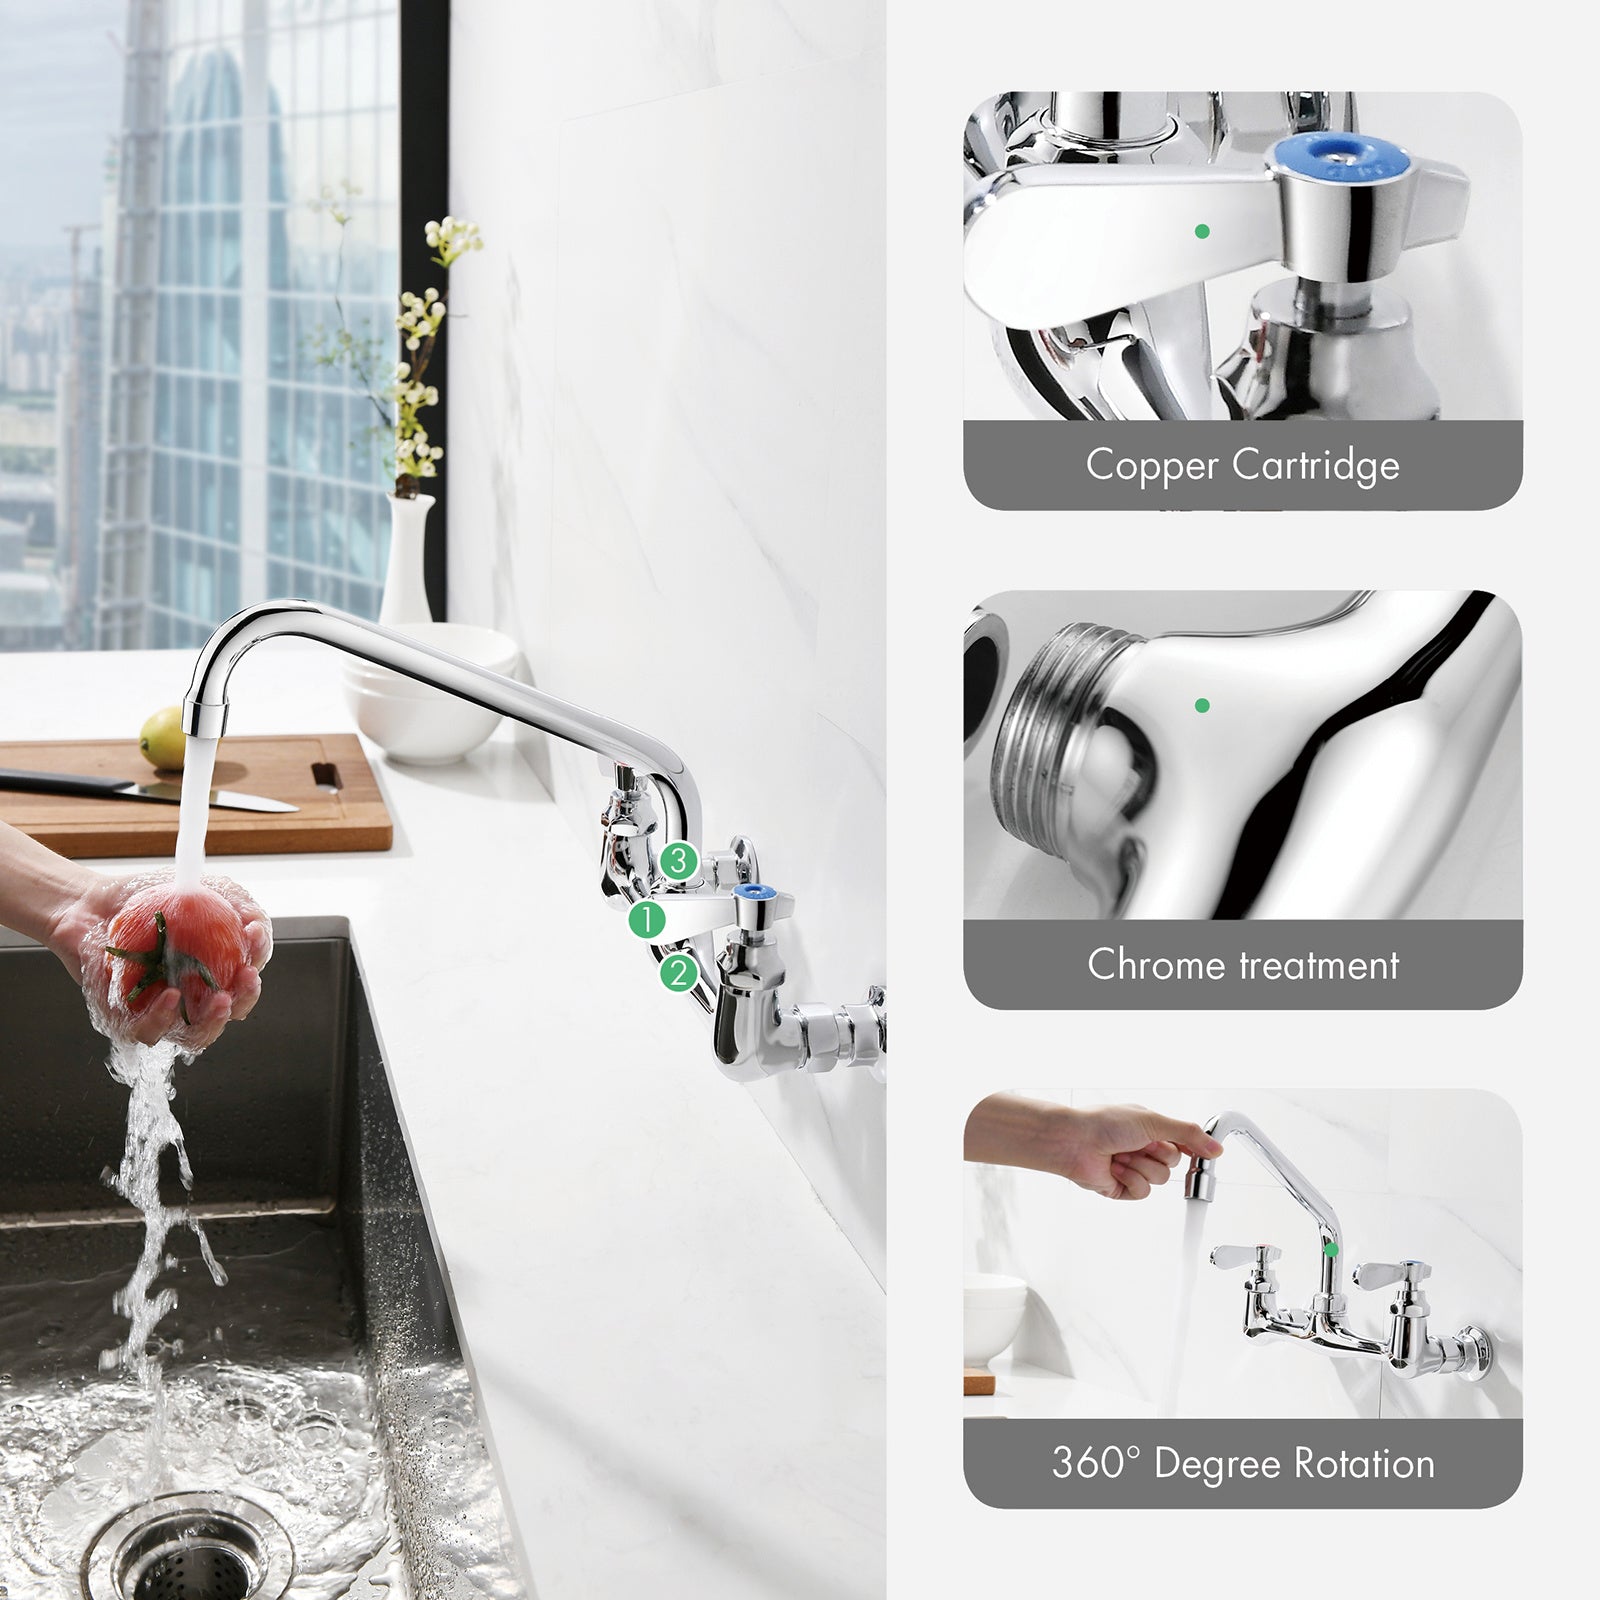 A APPASO Wall Mount Commercial Sink Faucet with 10" Swivel Spout, 8-in Center Kitchen Compartments Sink Faucet 2-Handle for Restaurant Home Backsplash Mount On 2 or 3 Bay Prep & Utility Compartment Sink with two handles on a white background.